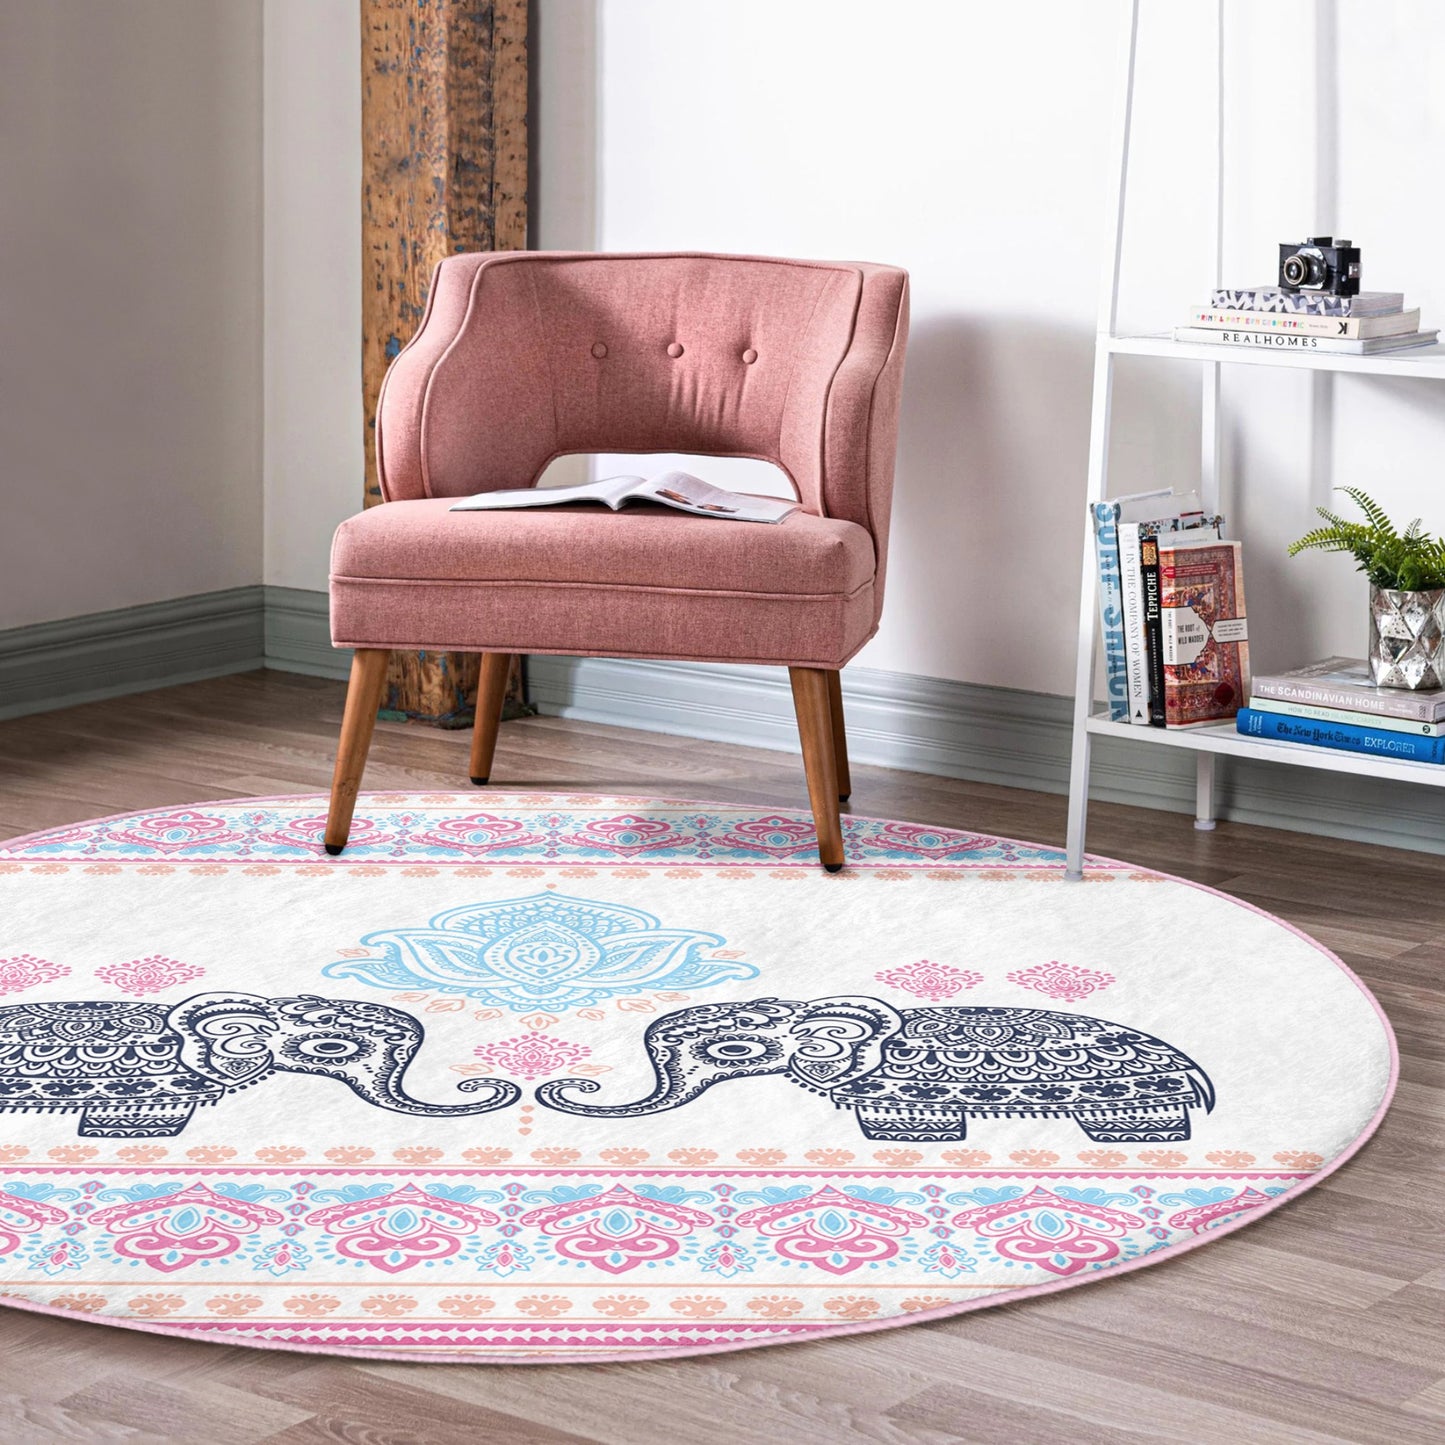 Round Patterned Floor Rug - Peaceful Accent